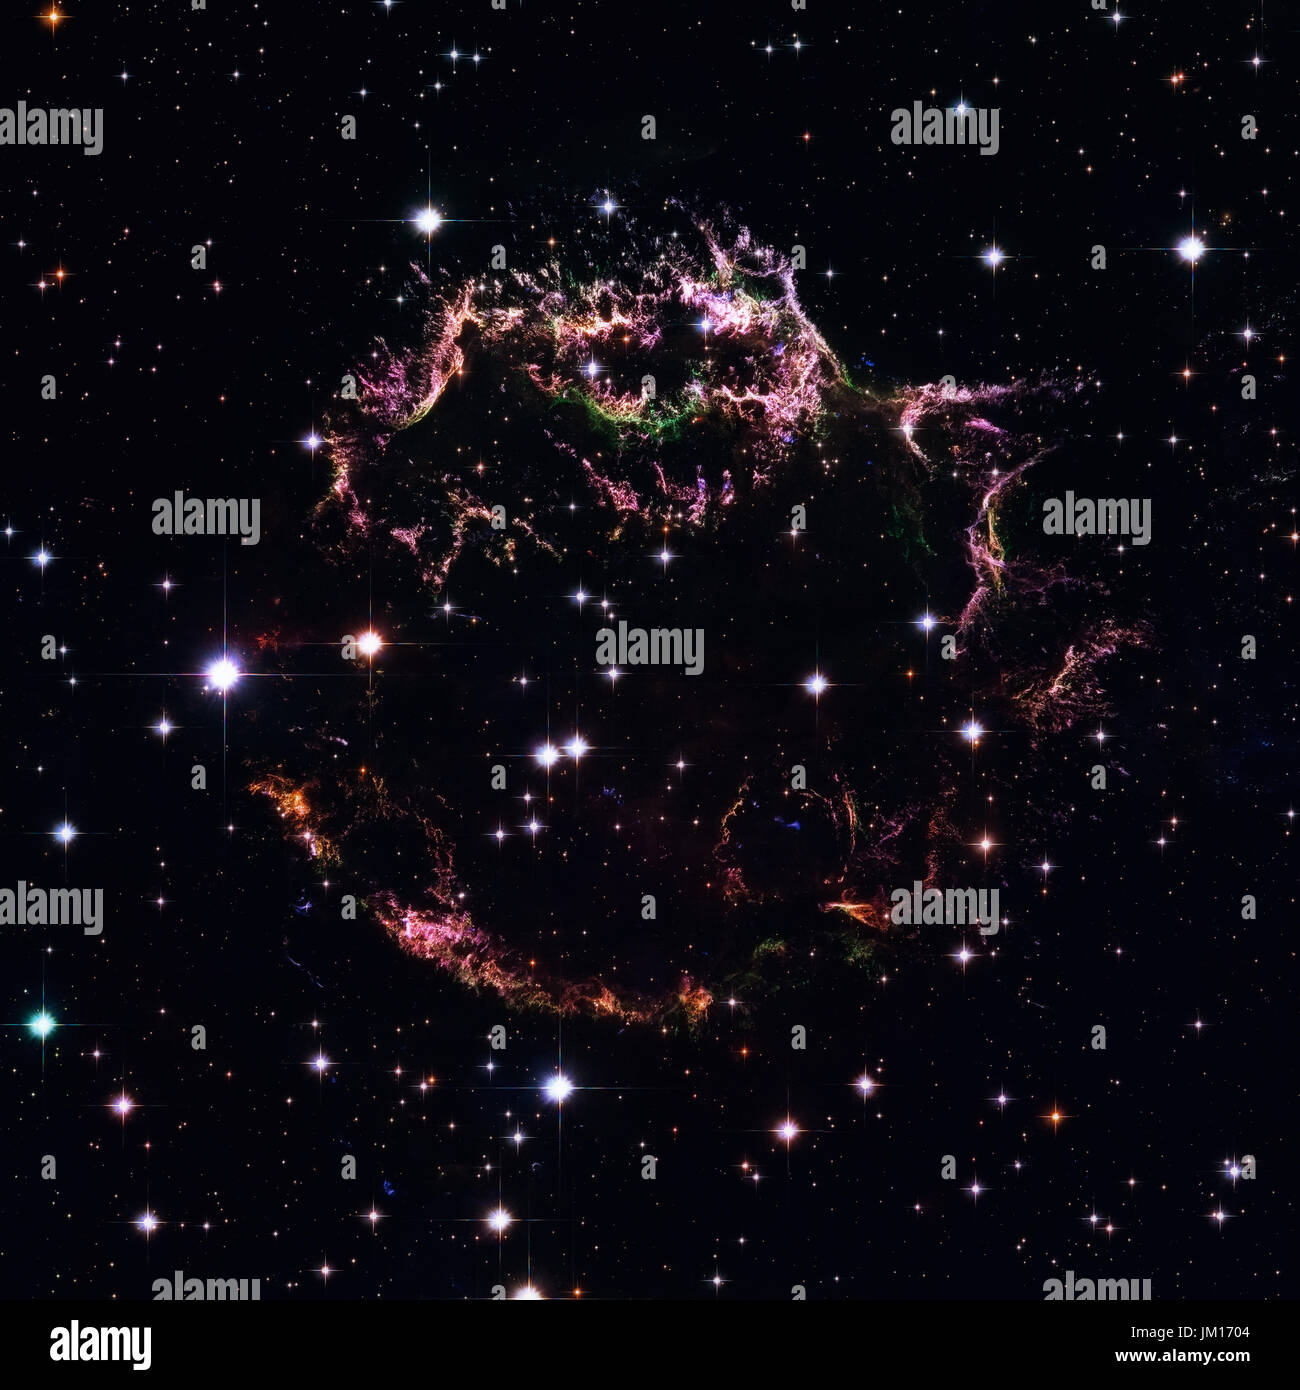 The tattered remains of a supernova explosion known as Cassiopeia A. It is the youngest known remnant from a supernova explosion in the Milky Way. Ele Stock Photo